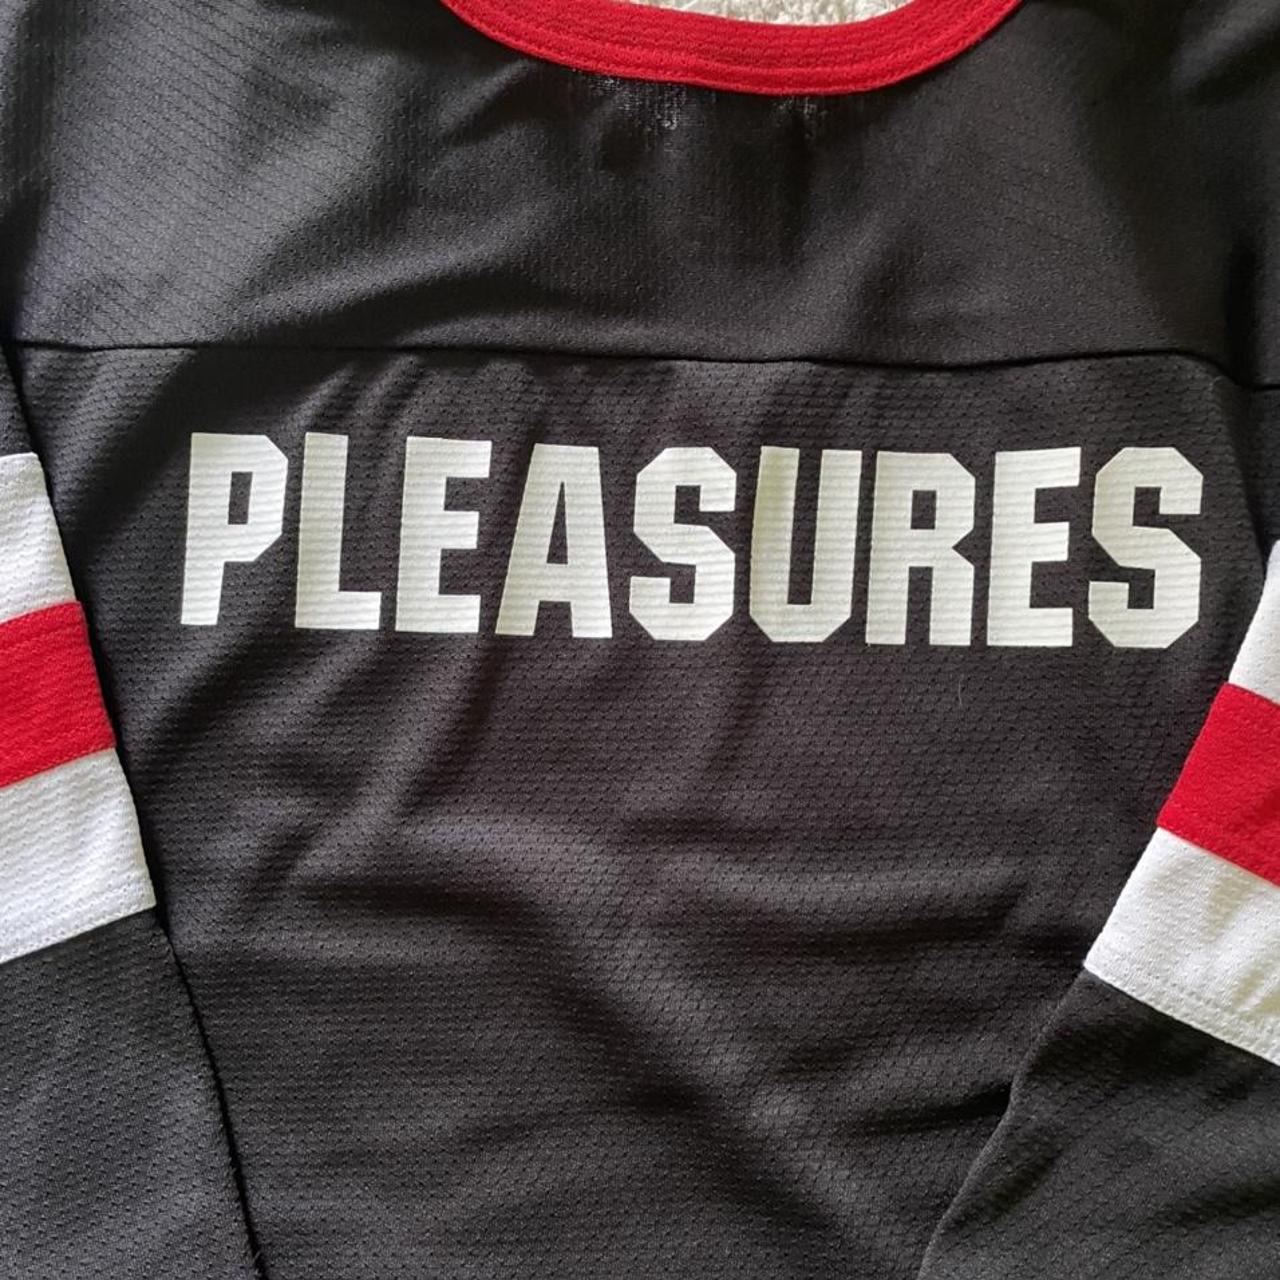 Product Image 3 - pleasures hockey jersey
size: small, fits